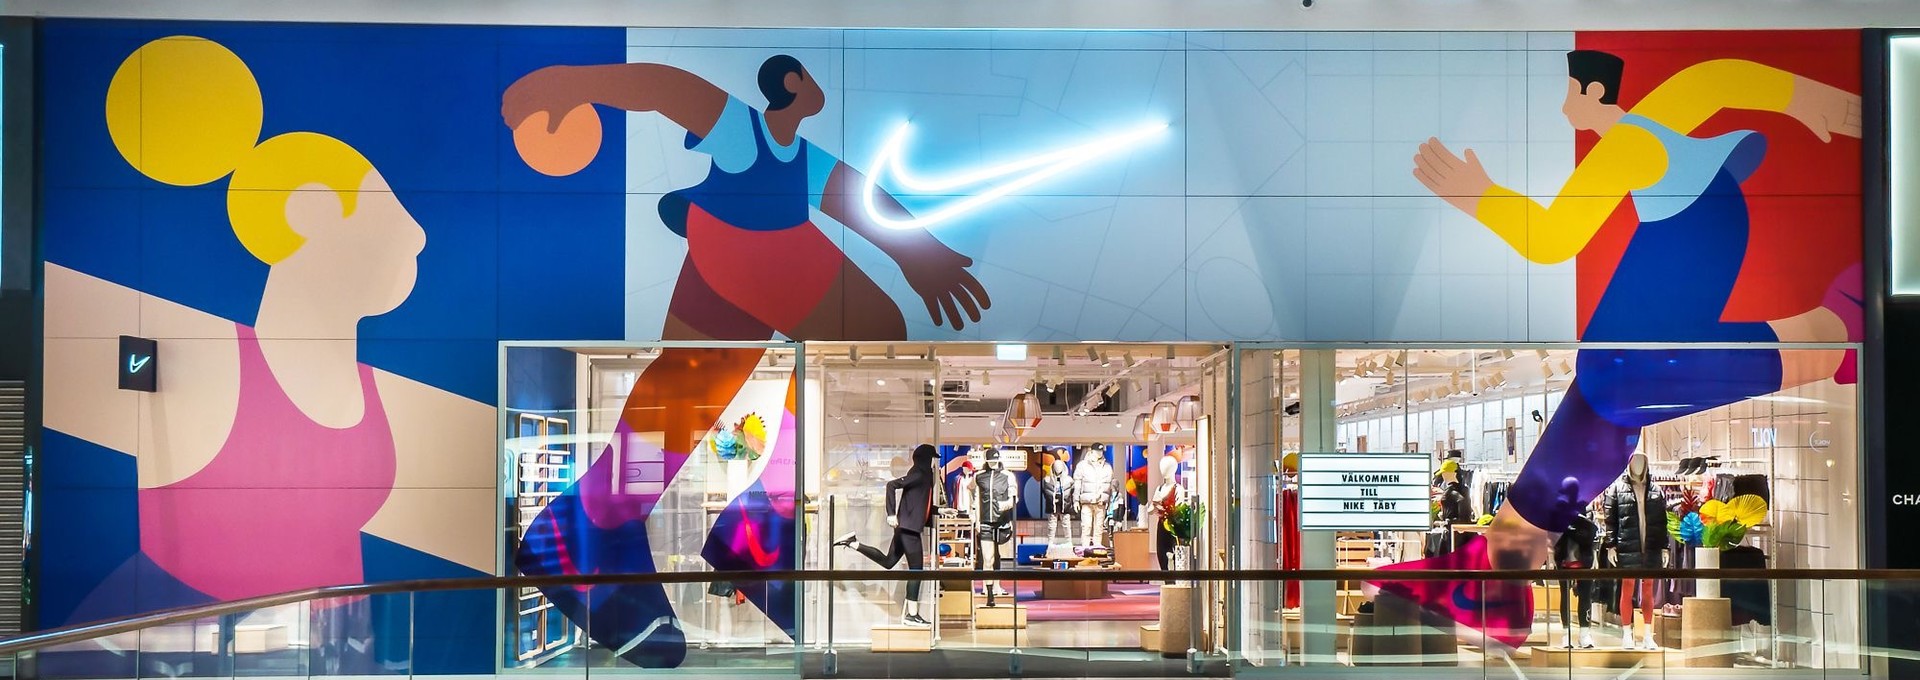 Studio Königshausen was pivotal in bringing the first Nike Live concept store to EMEA in Taby, Stockholm. Our design prioritised sustainability and innovation, creating a retail space exclusive to NikePlus loyalty program members. The store's interior emphasises the seamless integration of eco-friendly materials, underscoring a commitment to environmental consciousness. 